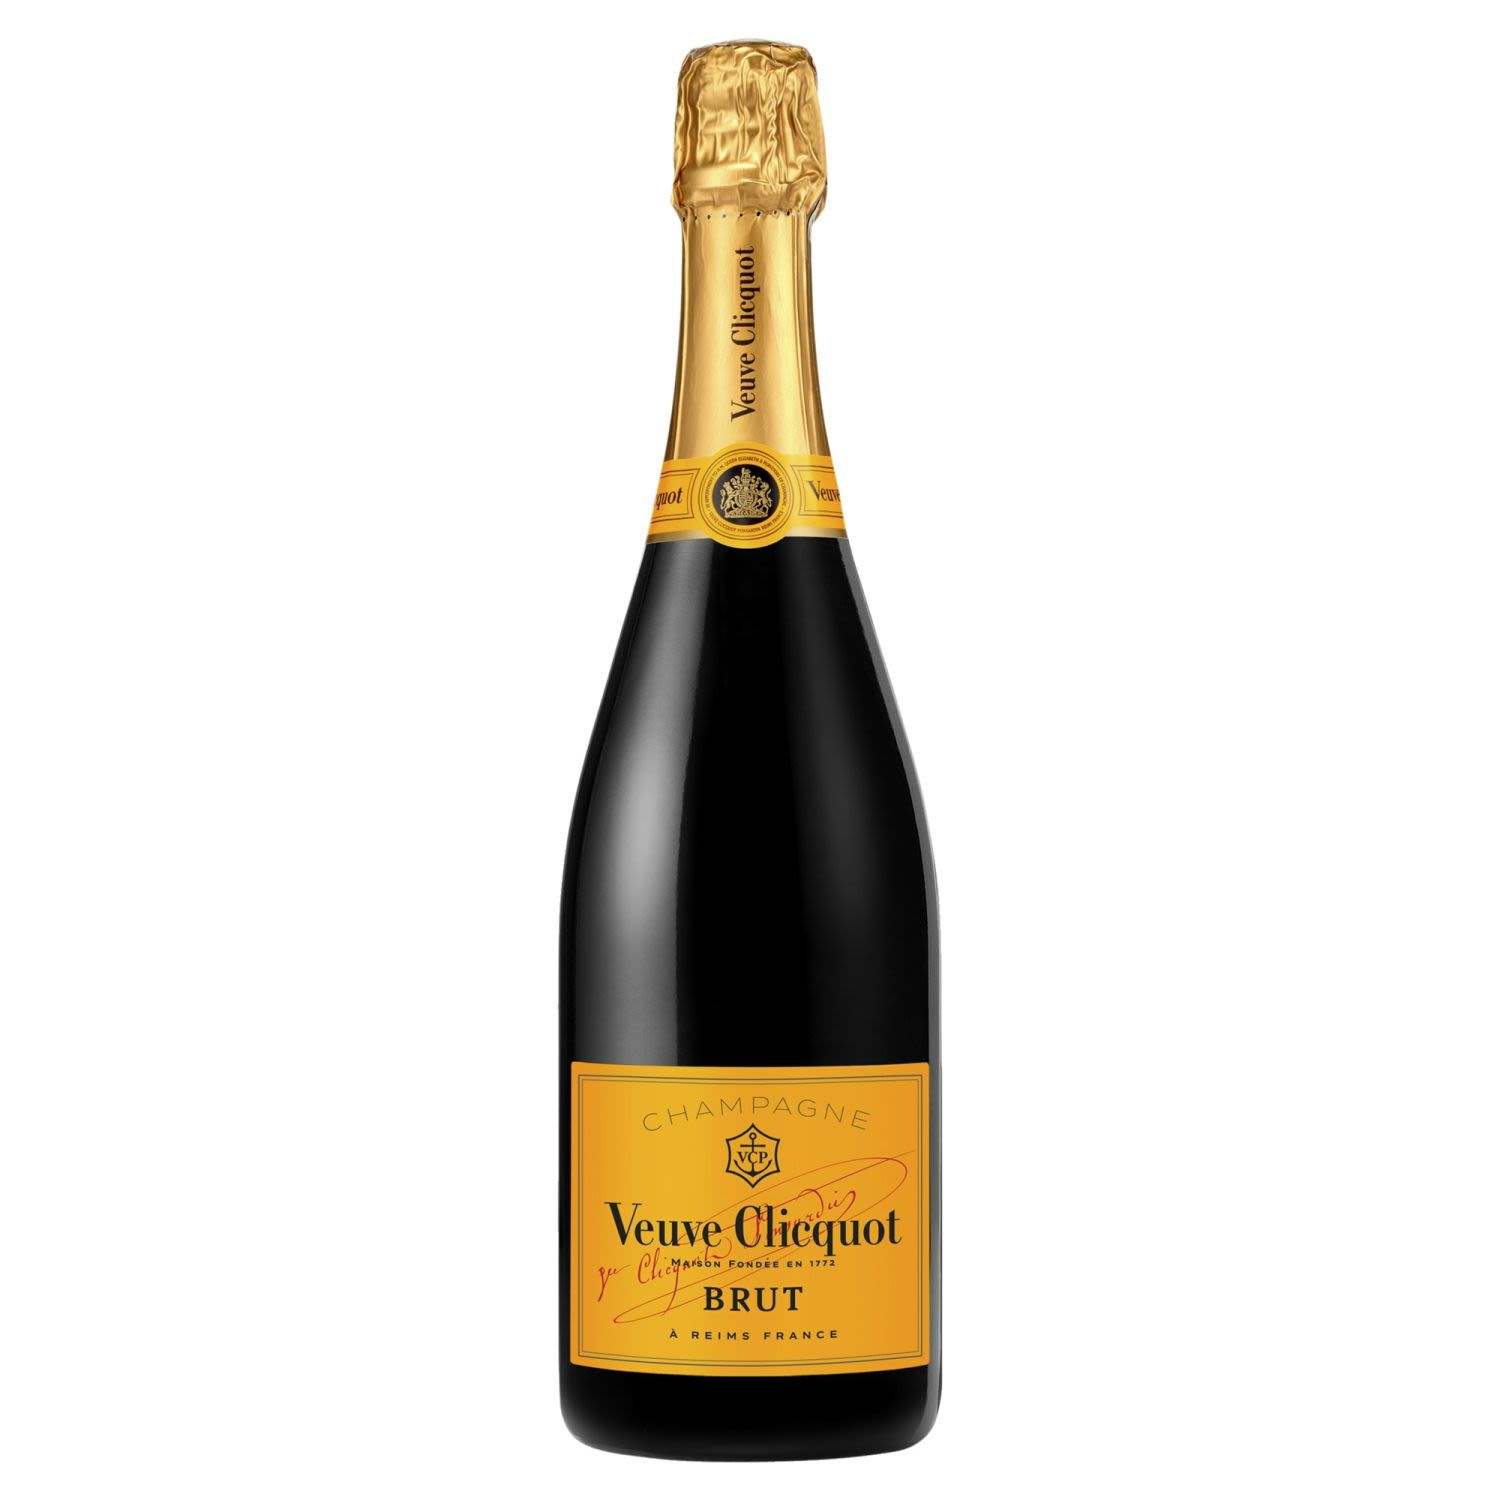 Founded in 1772, Veuve Clicquot has since lived by its motto, "Only one quality, the finest". "Yellow Label" is its signature wine, defining the Veuve Clicquot style through a perfect balance of strength, aromatic intensity, freshness & silkiness.<br /> <br />Alcohol Volume: 12.00%<br /><br />Pack Format: Bottle<br /><br />Standard Drinks: 7.1<br /><br />Pack Type: Bottle<br /><br />Country of Origin: France<br /><br />Region: Champagne<br /><br />Vintage: Non Vintage<br />